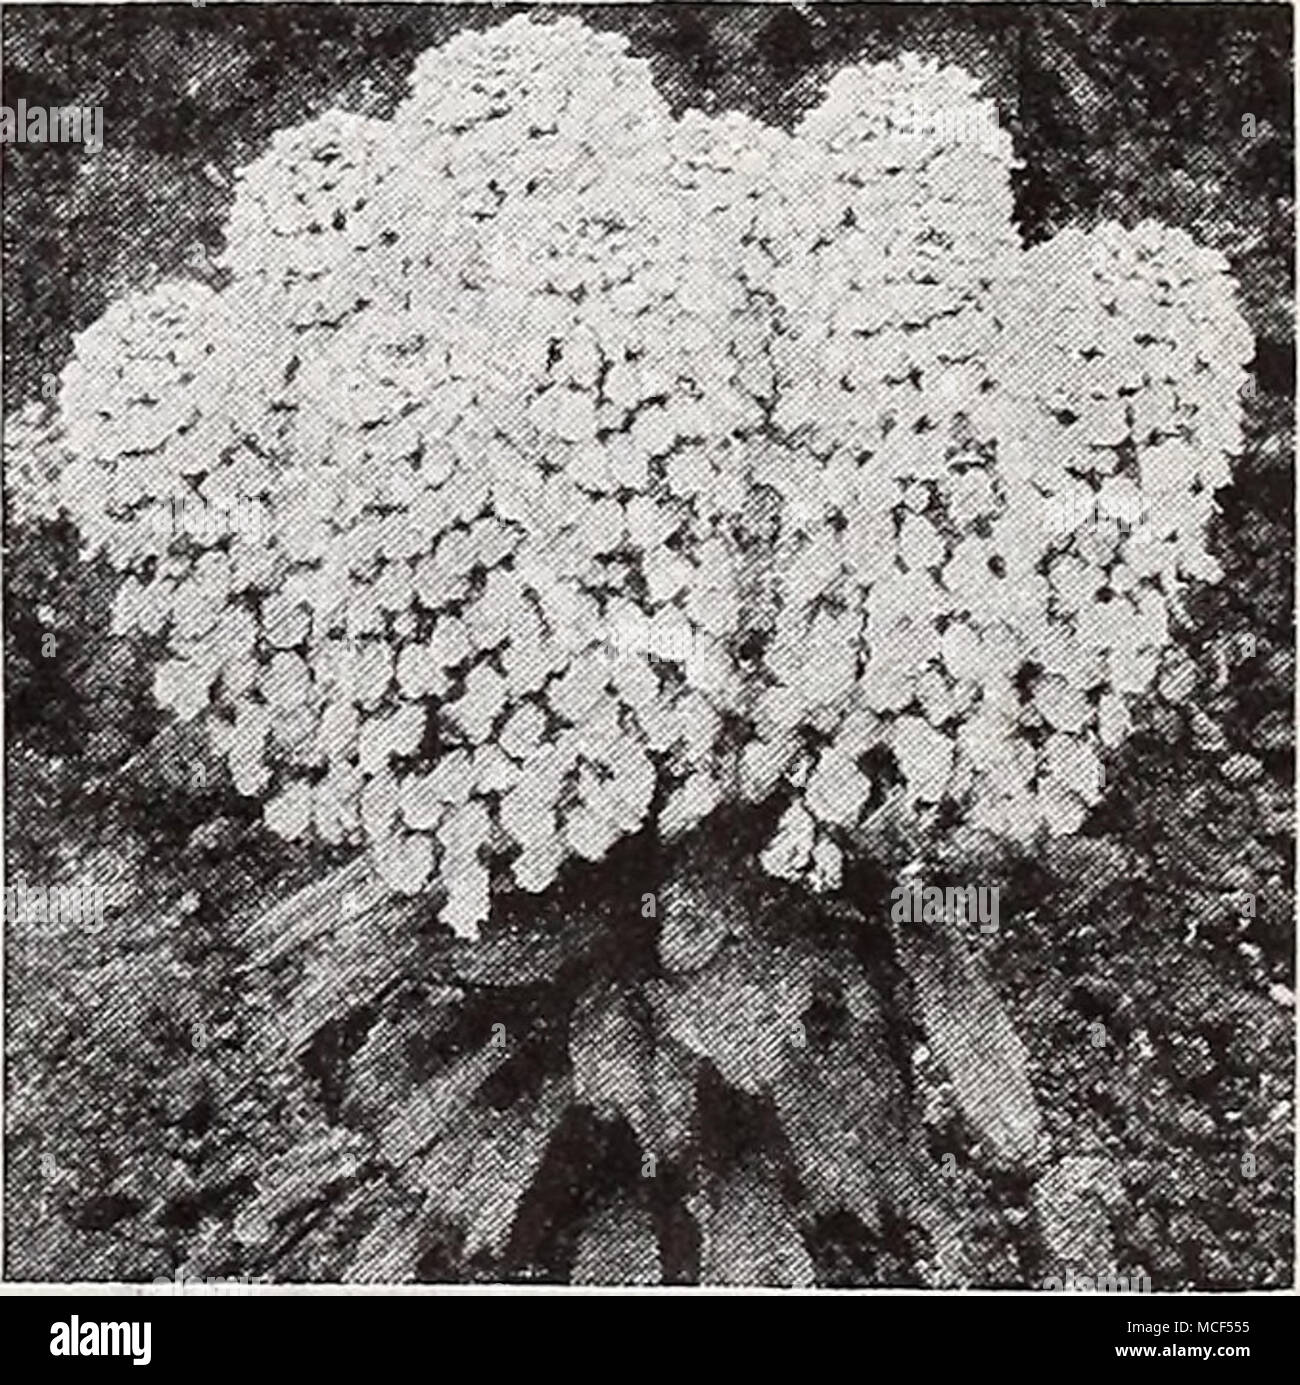 . Giant Hyacinth-Flowered Candytuft 1721 Giant Hyacinth-Flowered White. A wonderful strain with much- branched plants about 18 inches high, each branch terminated by an immense spike of white. Pkt. 10c; j oz. 40c; 5 oz. 65c; oz. Sl-25. Cardinal Climber ® § 1757 Ipomoea quamoclit Sloteri. This Dreer introduction is universally considered the most beautiful and colorful of all annual climbers. Grows thirty feet tall and is studded with magnificent brilliant cardinal-red blooms from midsummer until frost. Pkt. 10c; special pkt. 25c; J oz. 40c. Caryopteris H An interesting shrubby plant 2 feet hig Stock Photo